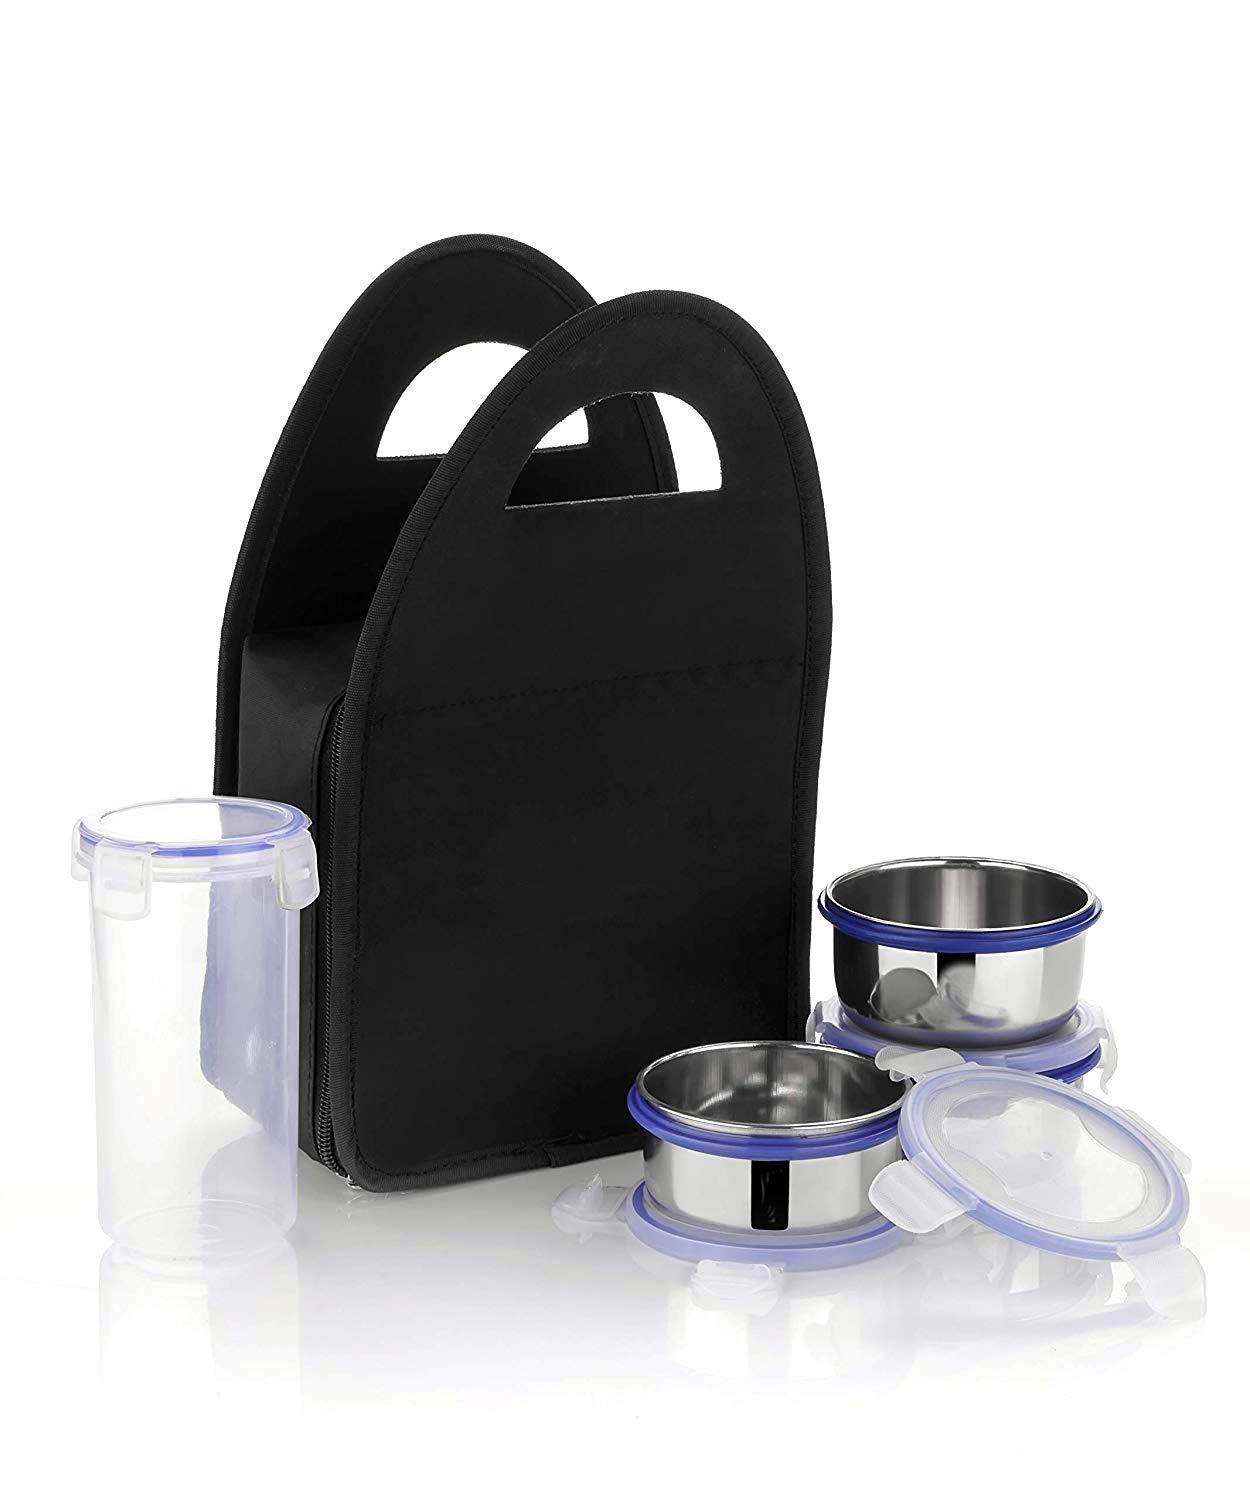 2201 Compact Stainless Steel Airtight Lunch Box Set - 4 pcs (3 Leakproof Containers and 1 Bottle) - SkyShopy